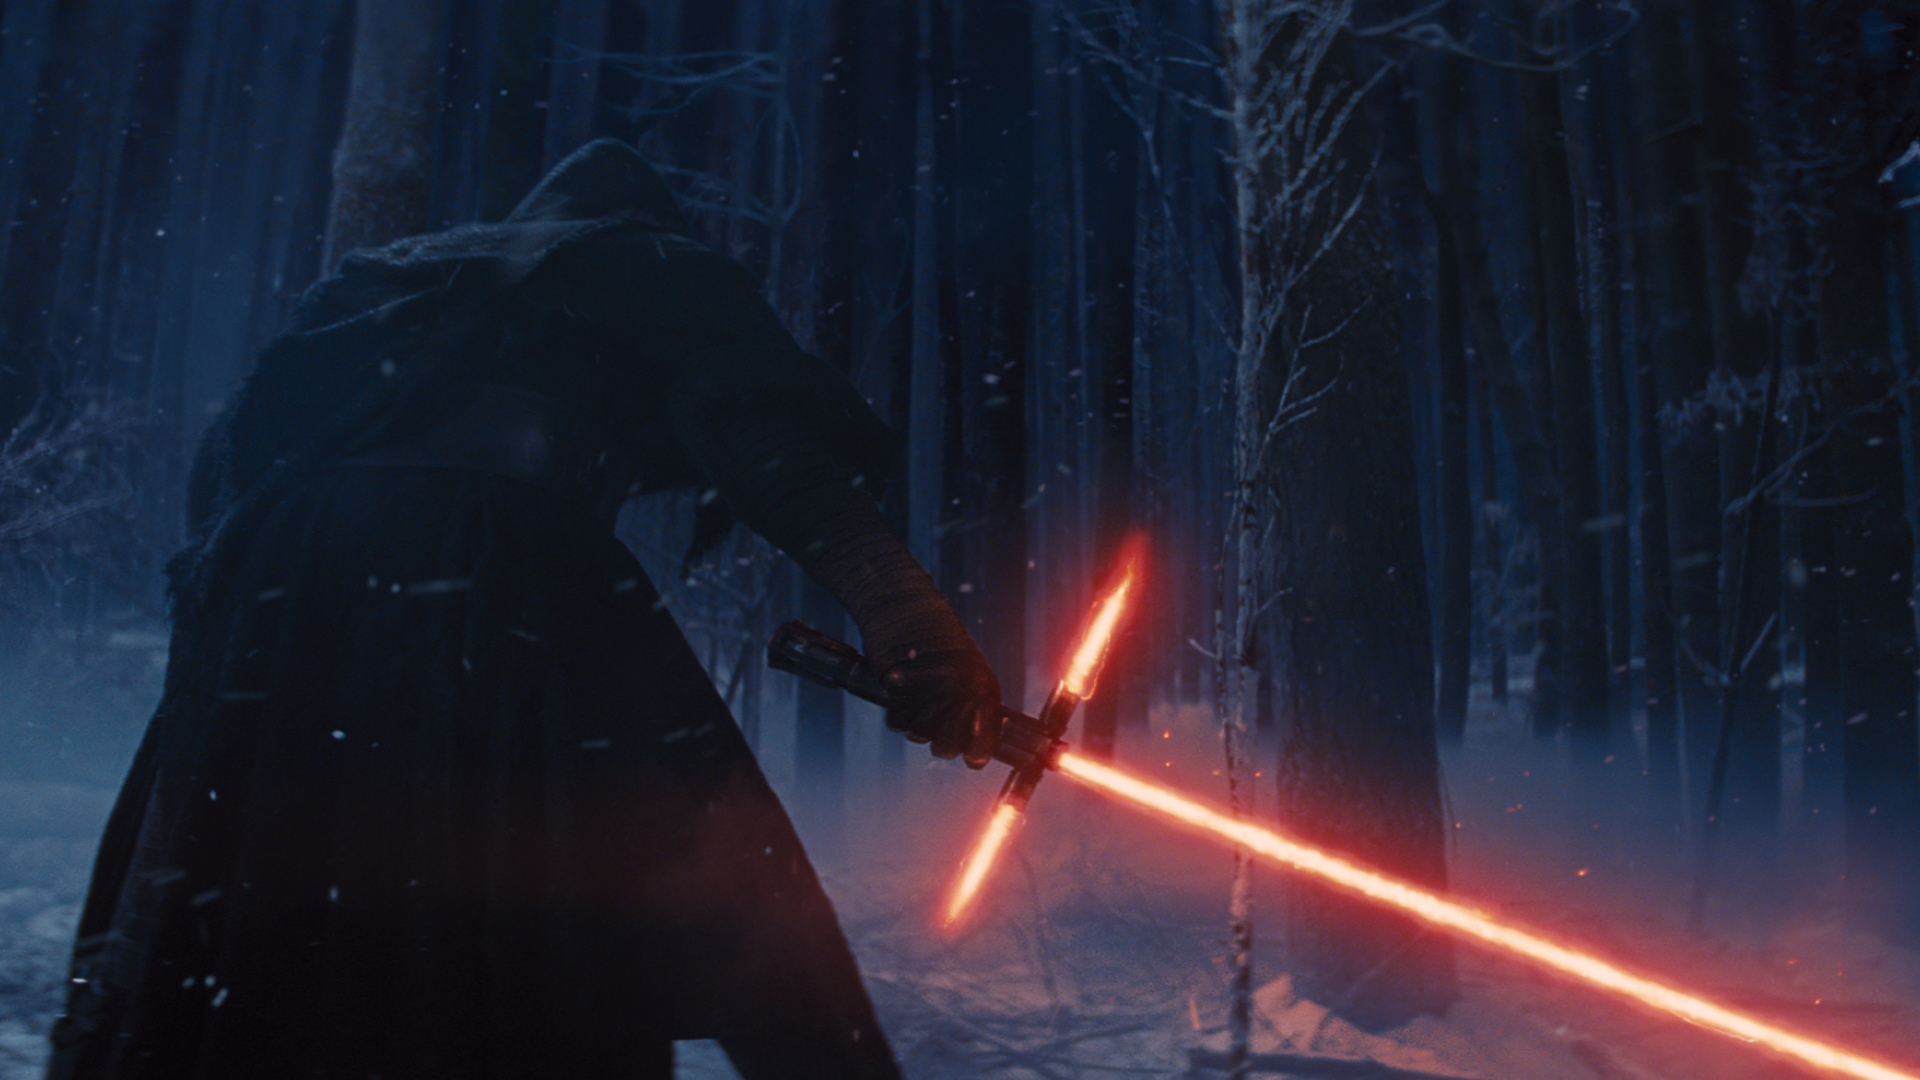 204 Star Wars Episode Vii The Force Awakens Hd Wallpapers